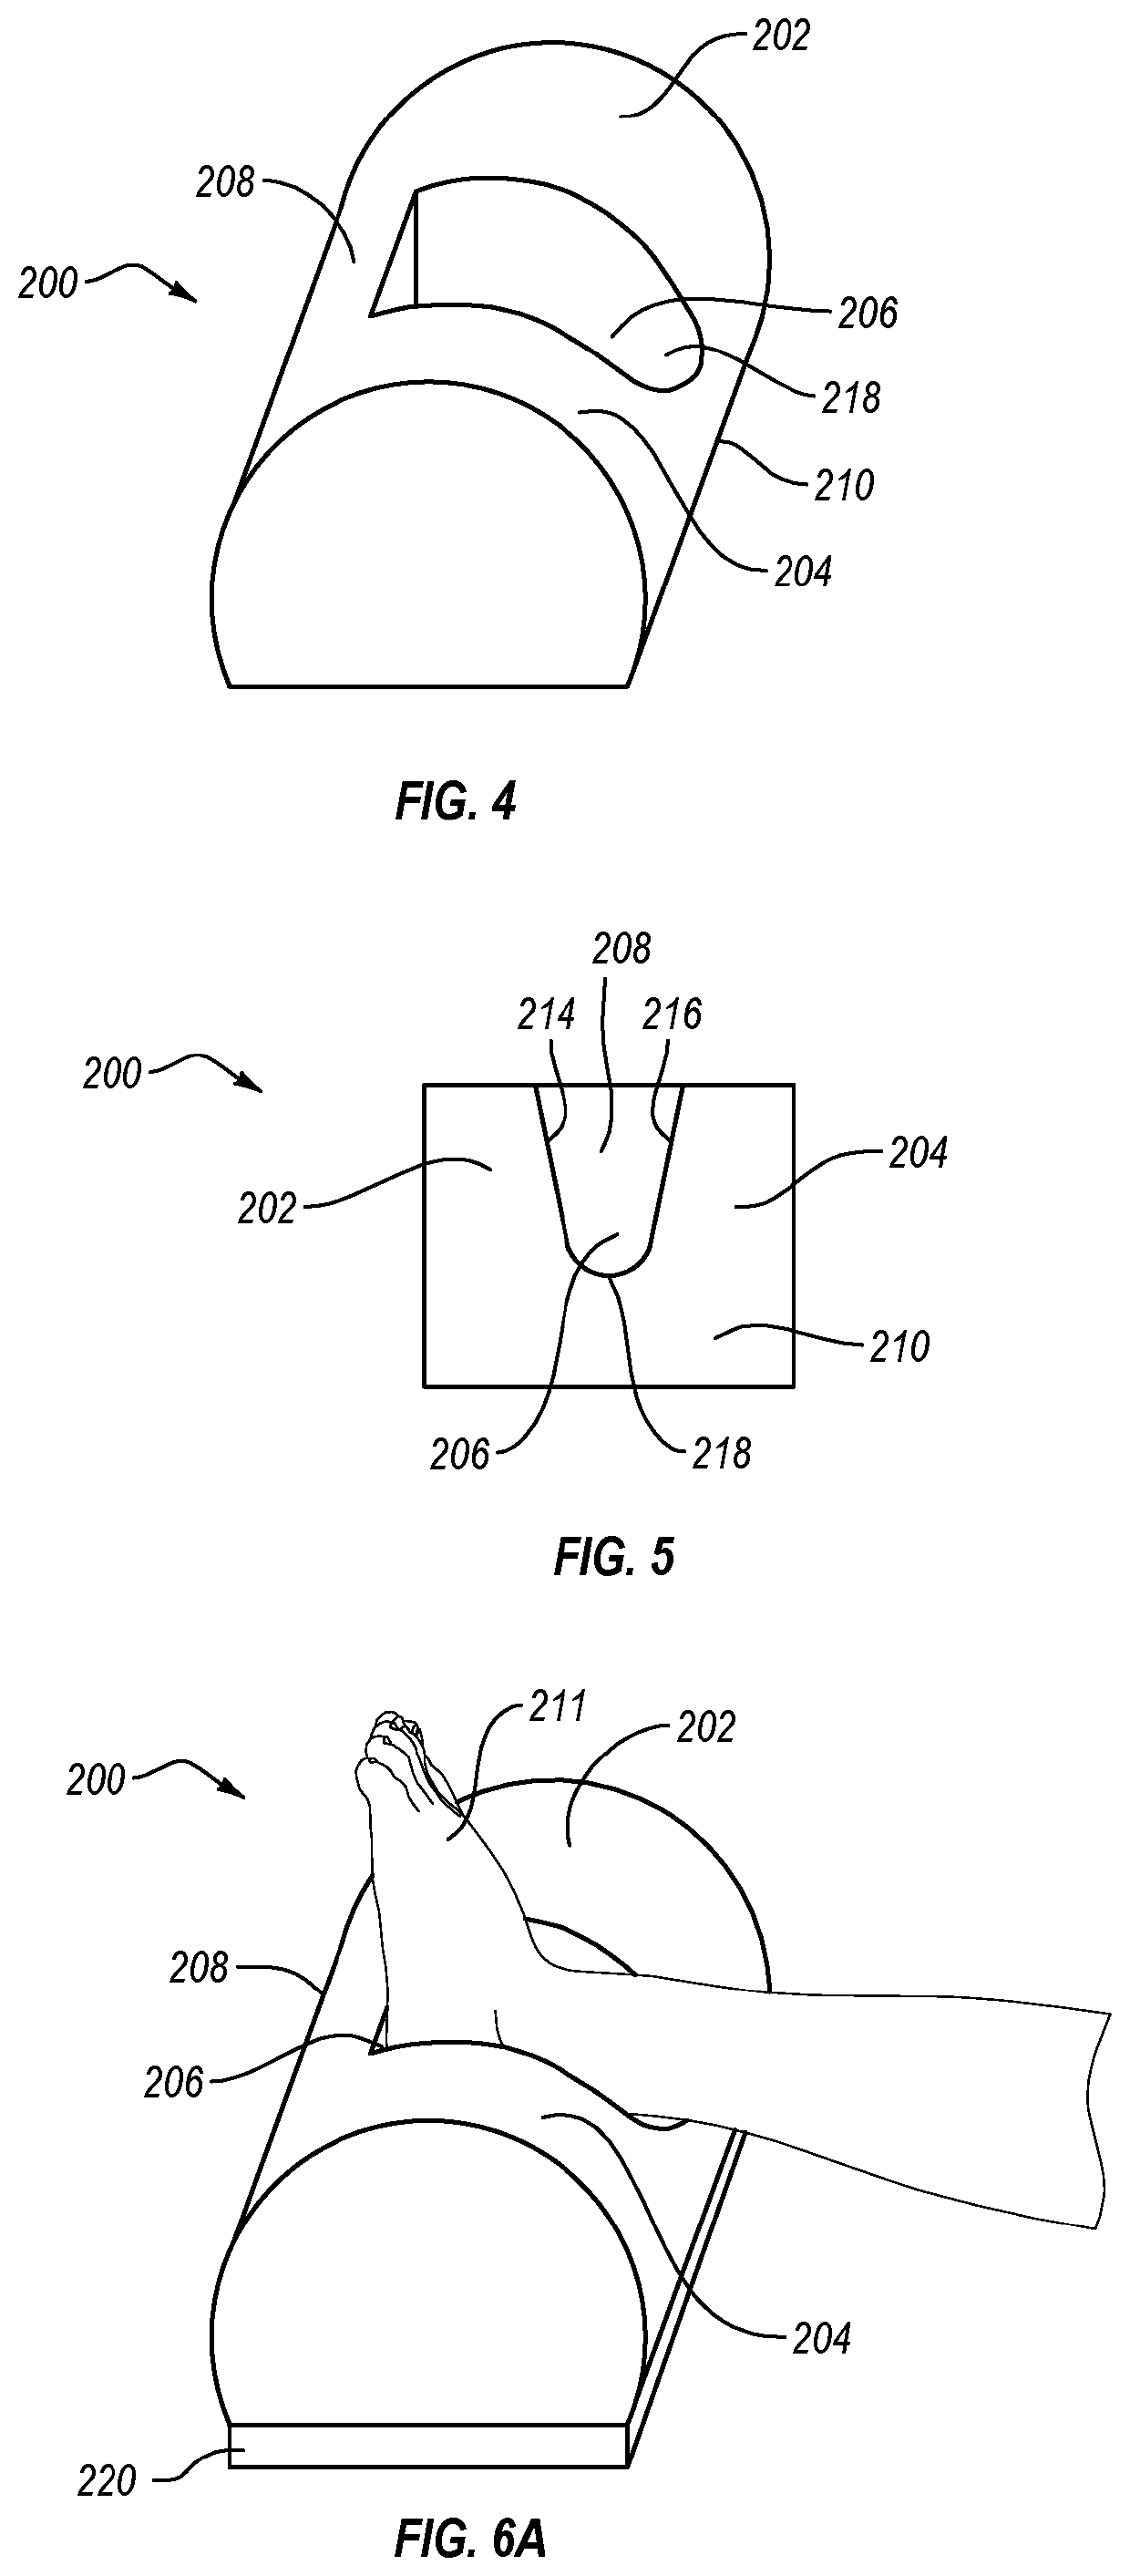 Orthopedic device and method for lower limb elevation and stabilization